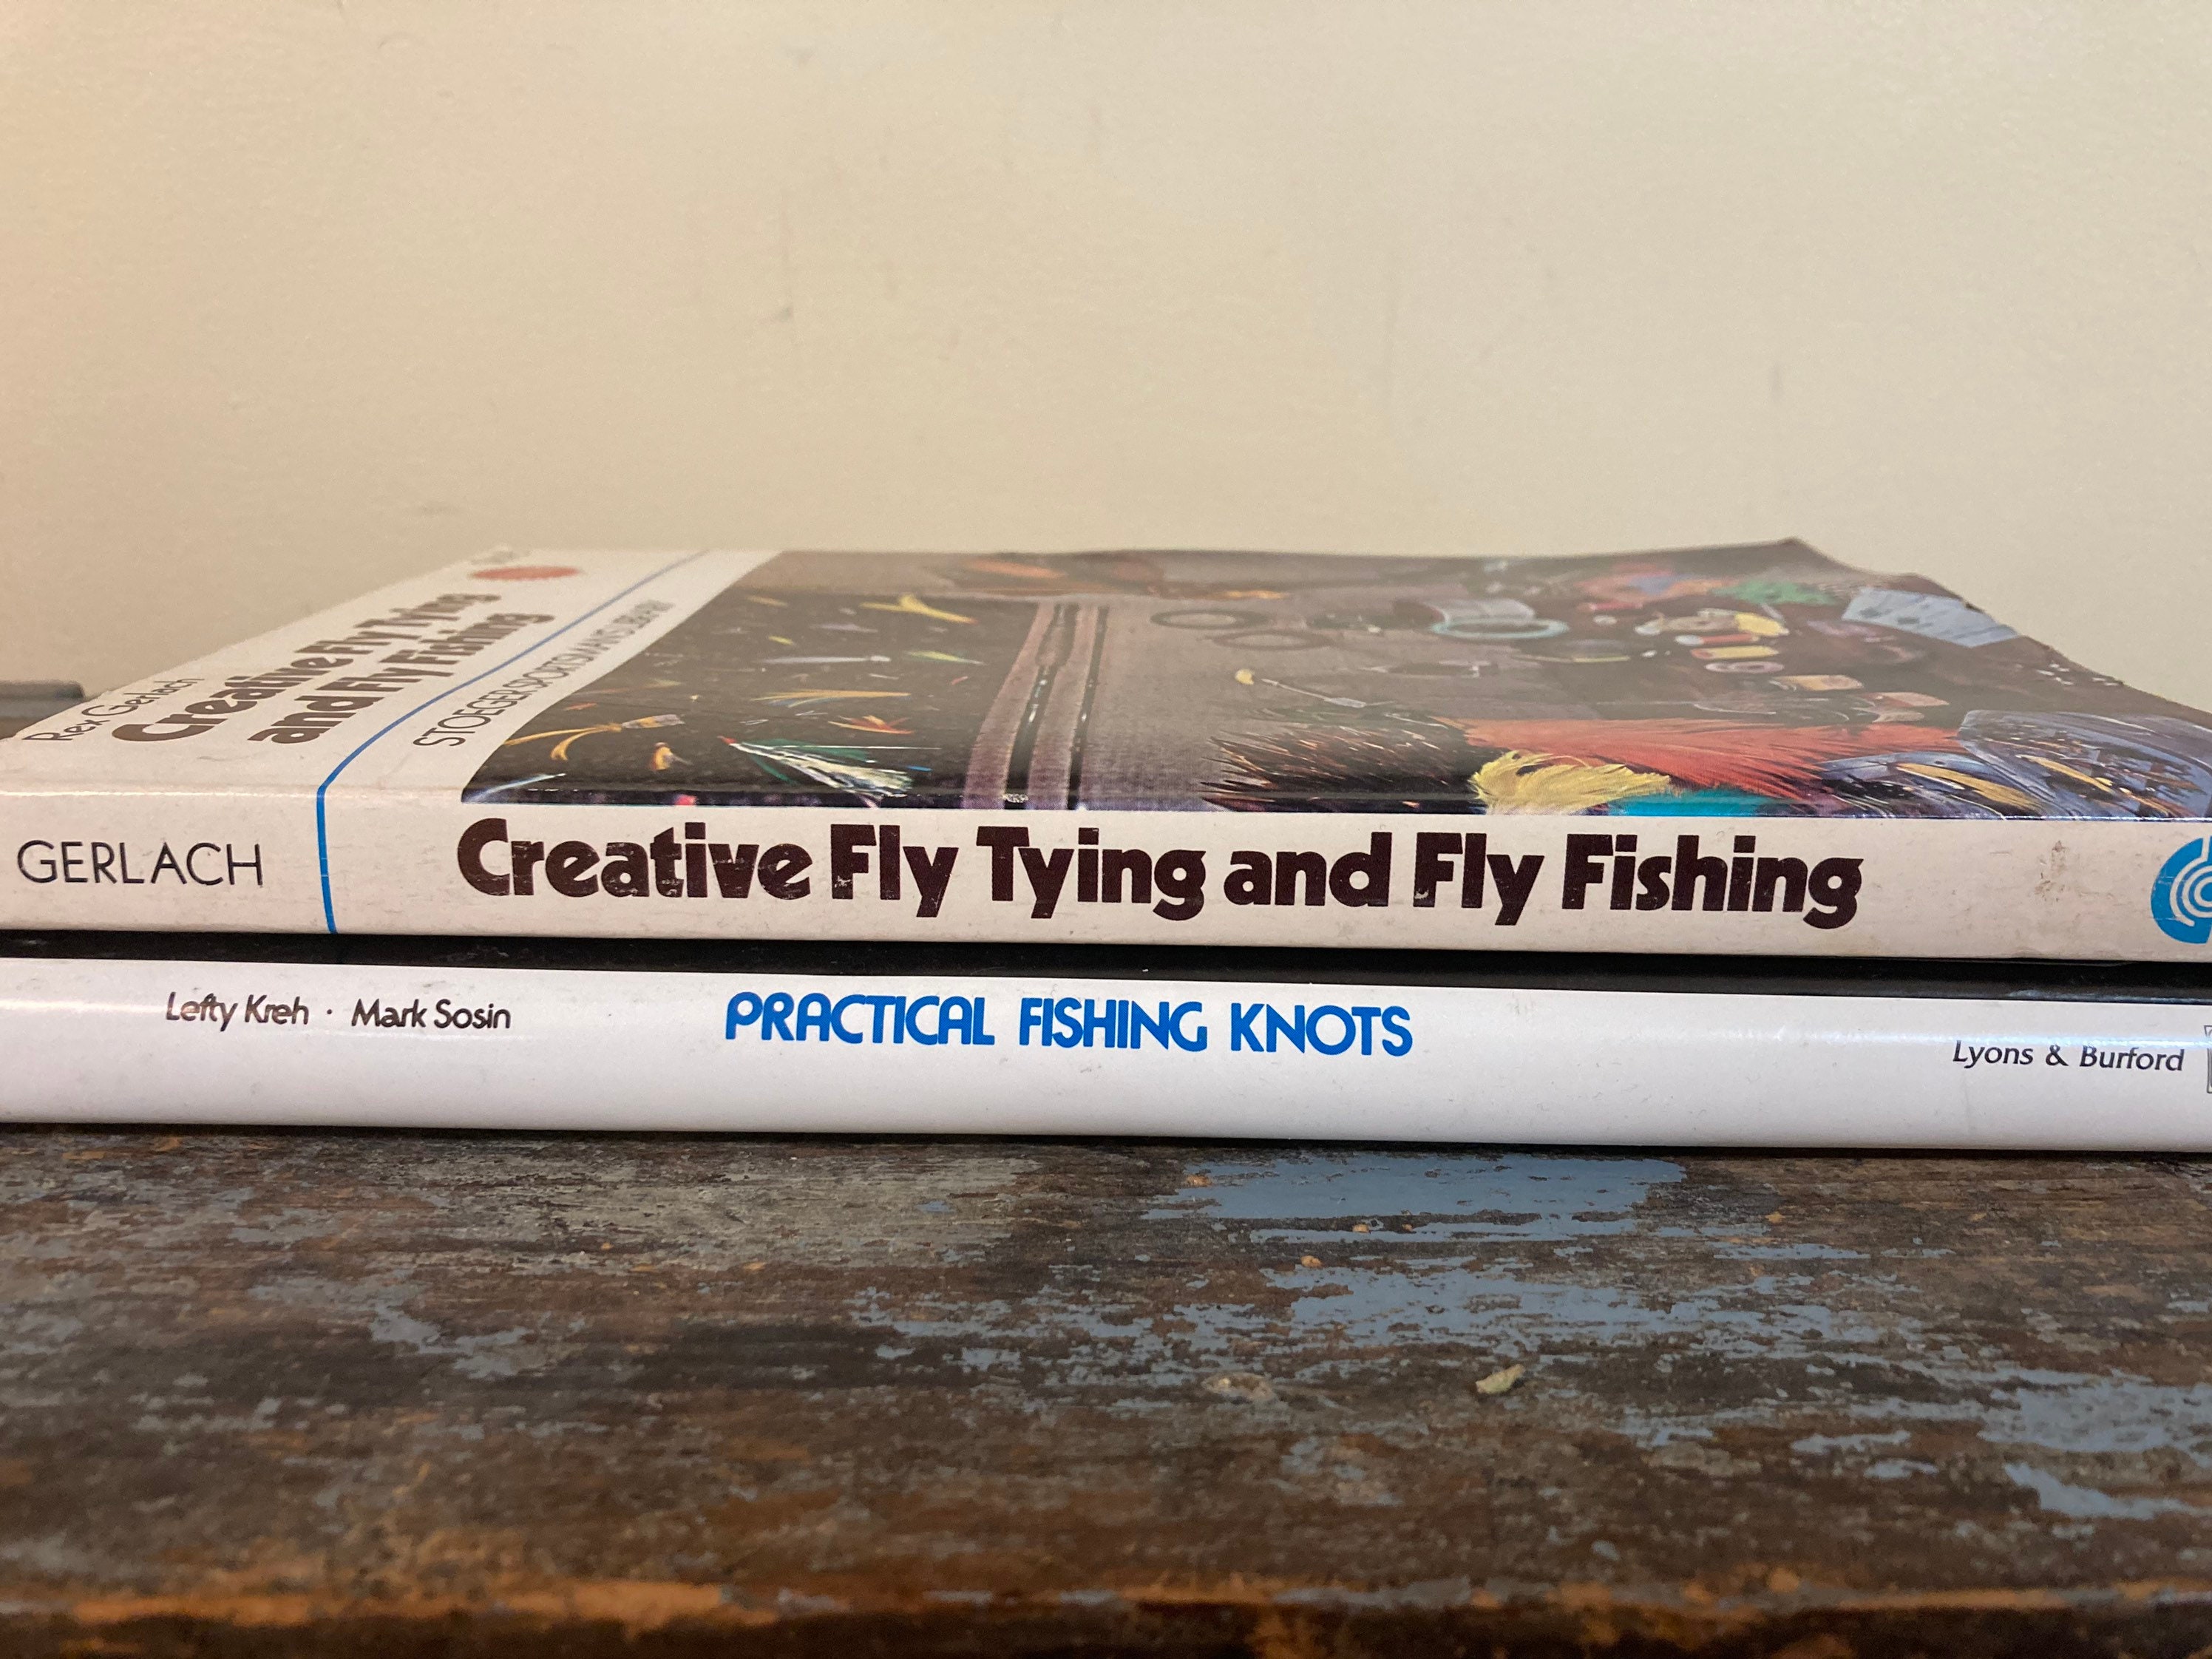 Creative Fly Tying and Fly Fishing. Practical Fishing Knots. Book